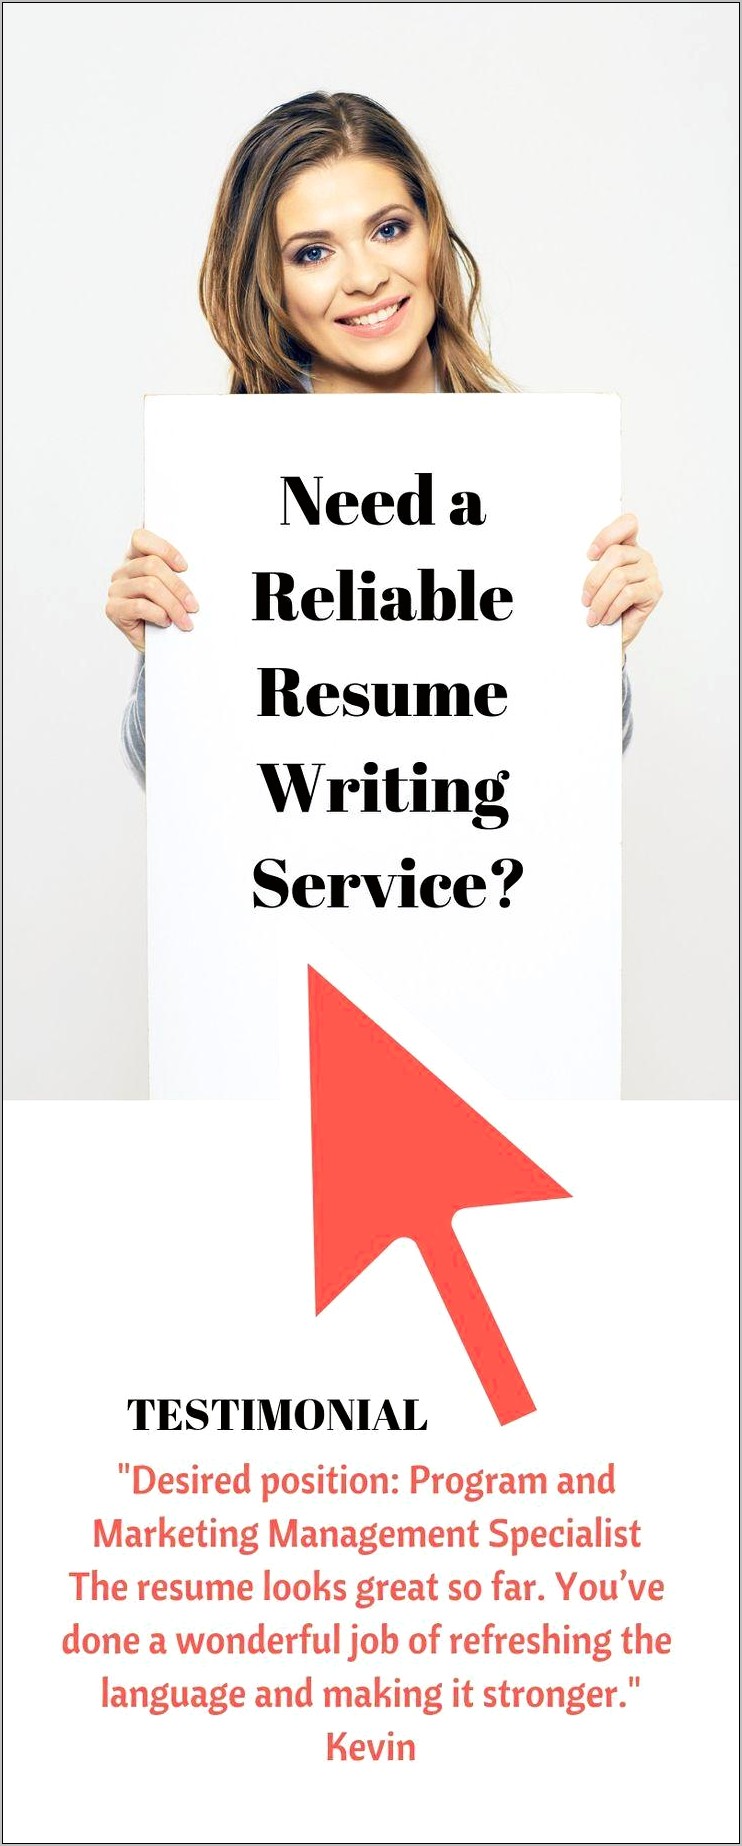 Free Or Low Cost Resume Writing Services